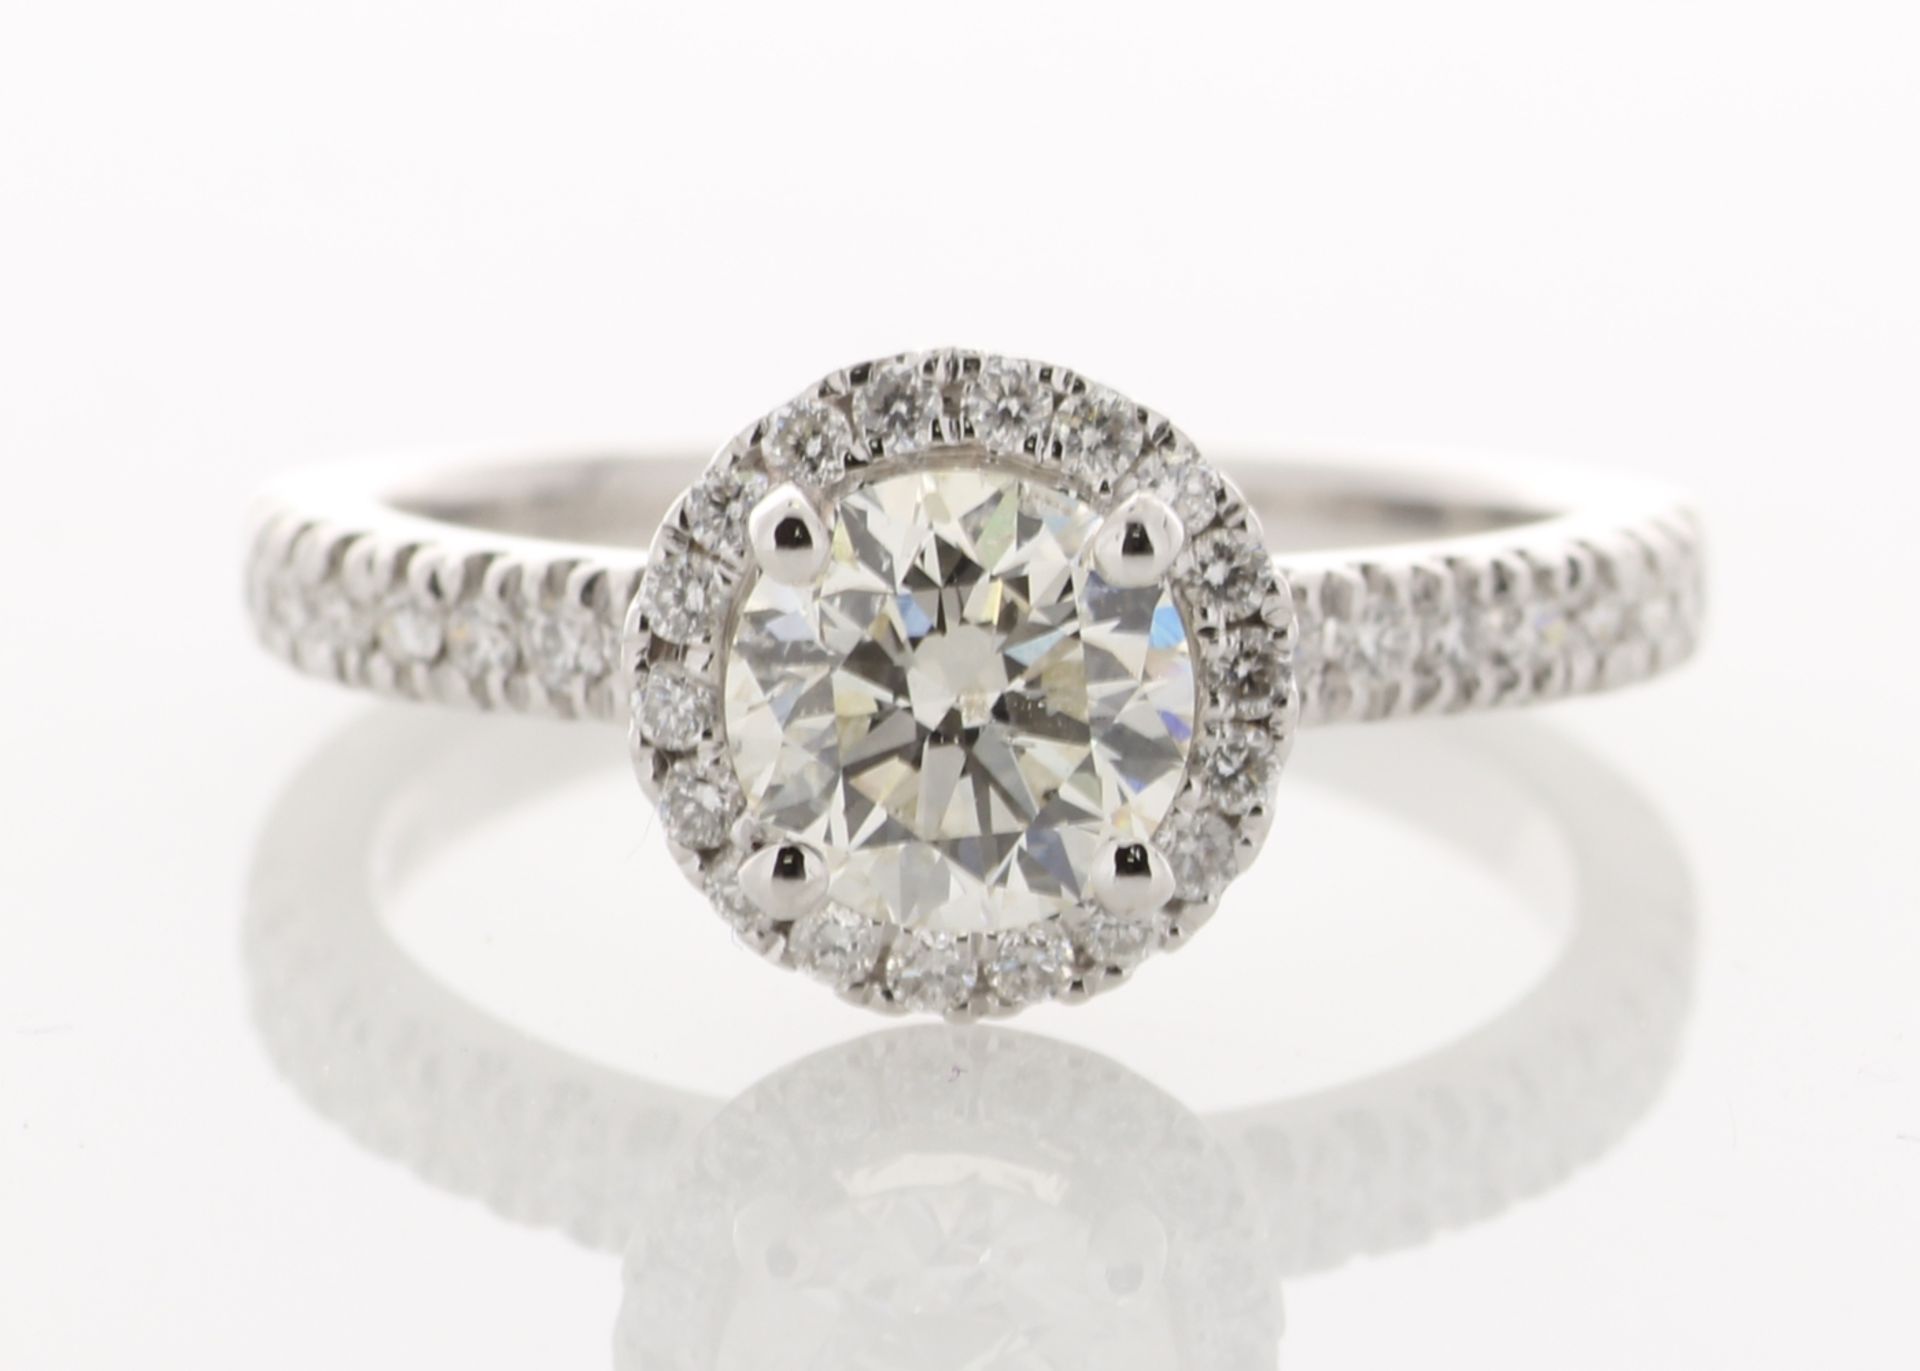 18ct White Gold Single Stone With Halo Setting Ring (1.01) 1.37 Carats - Valued by IDI £20,000.